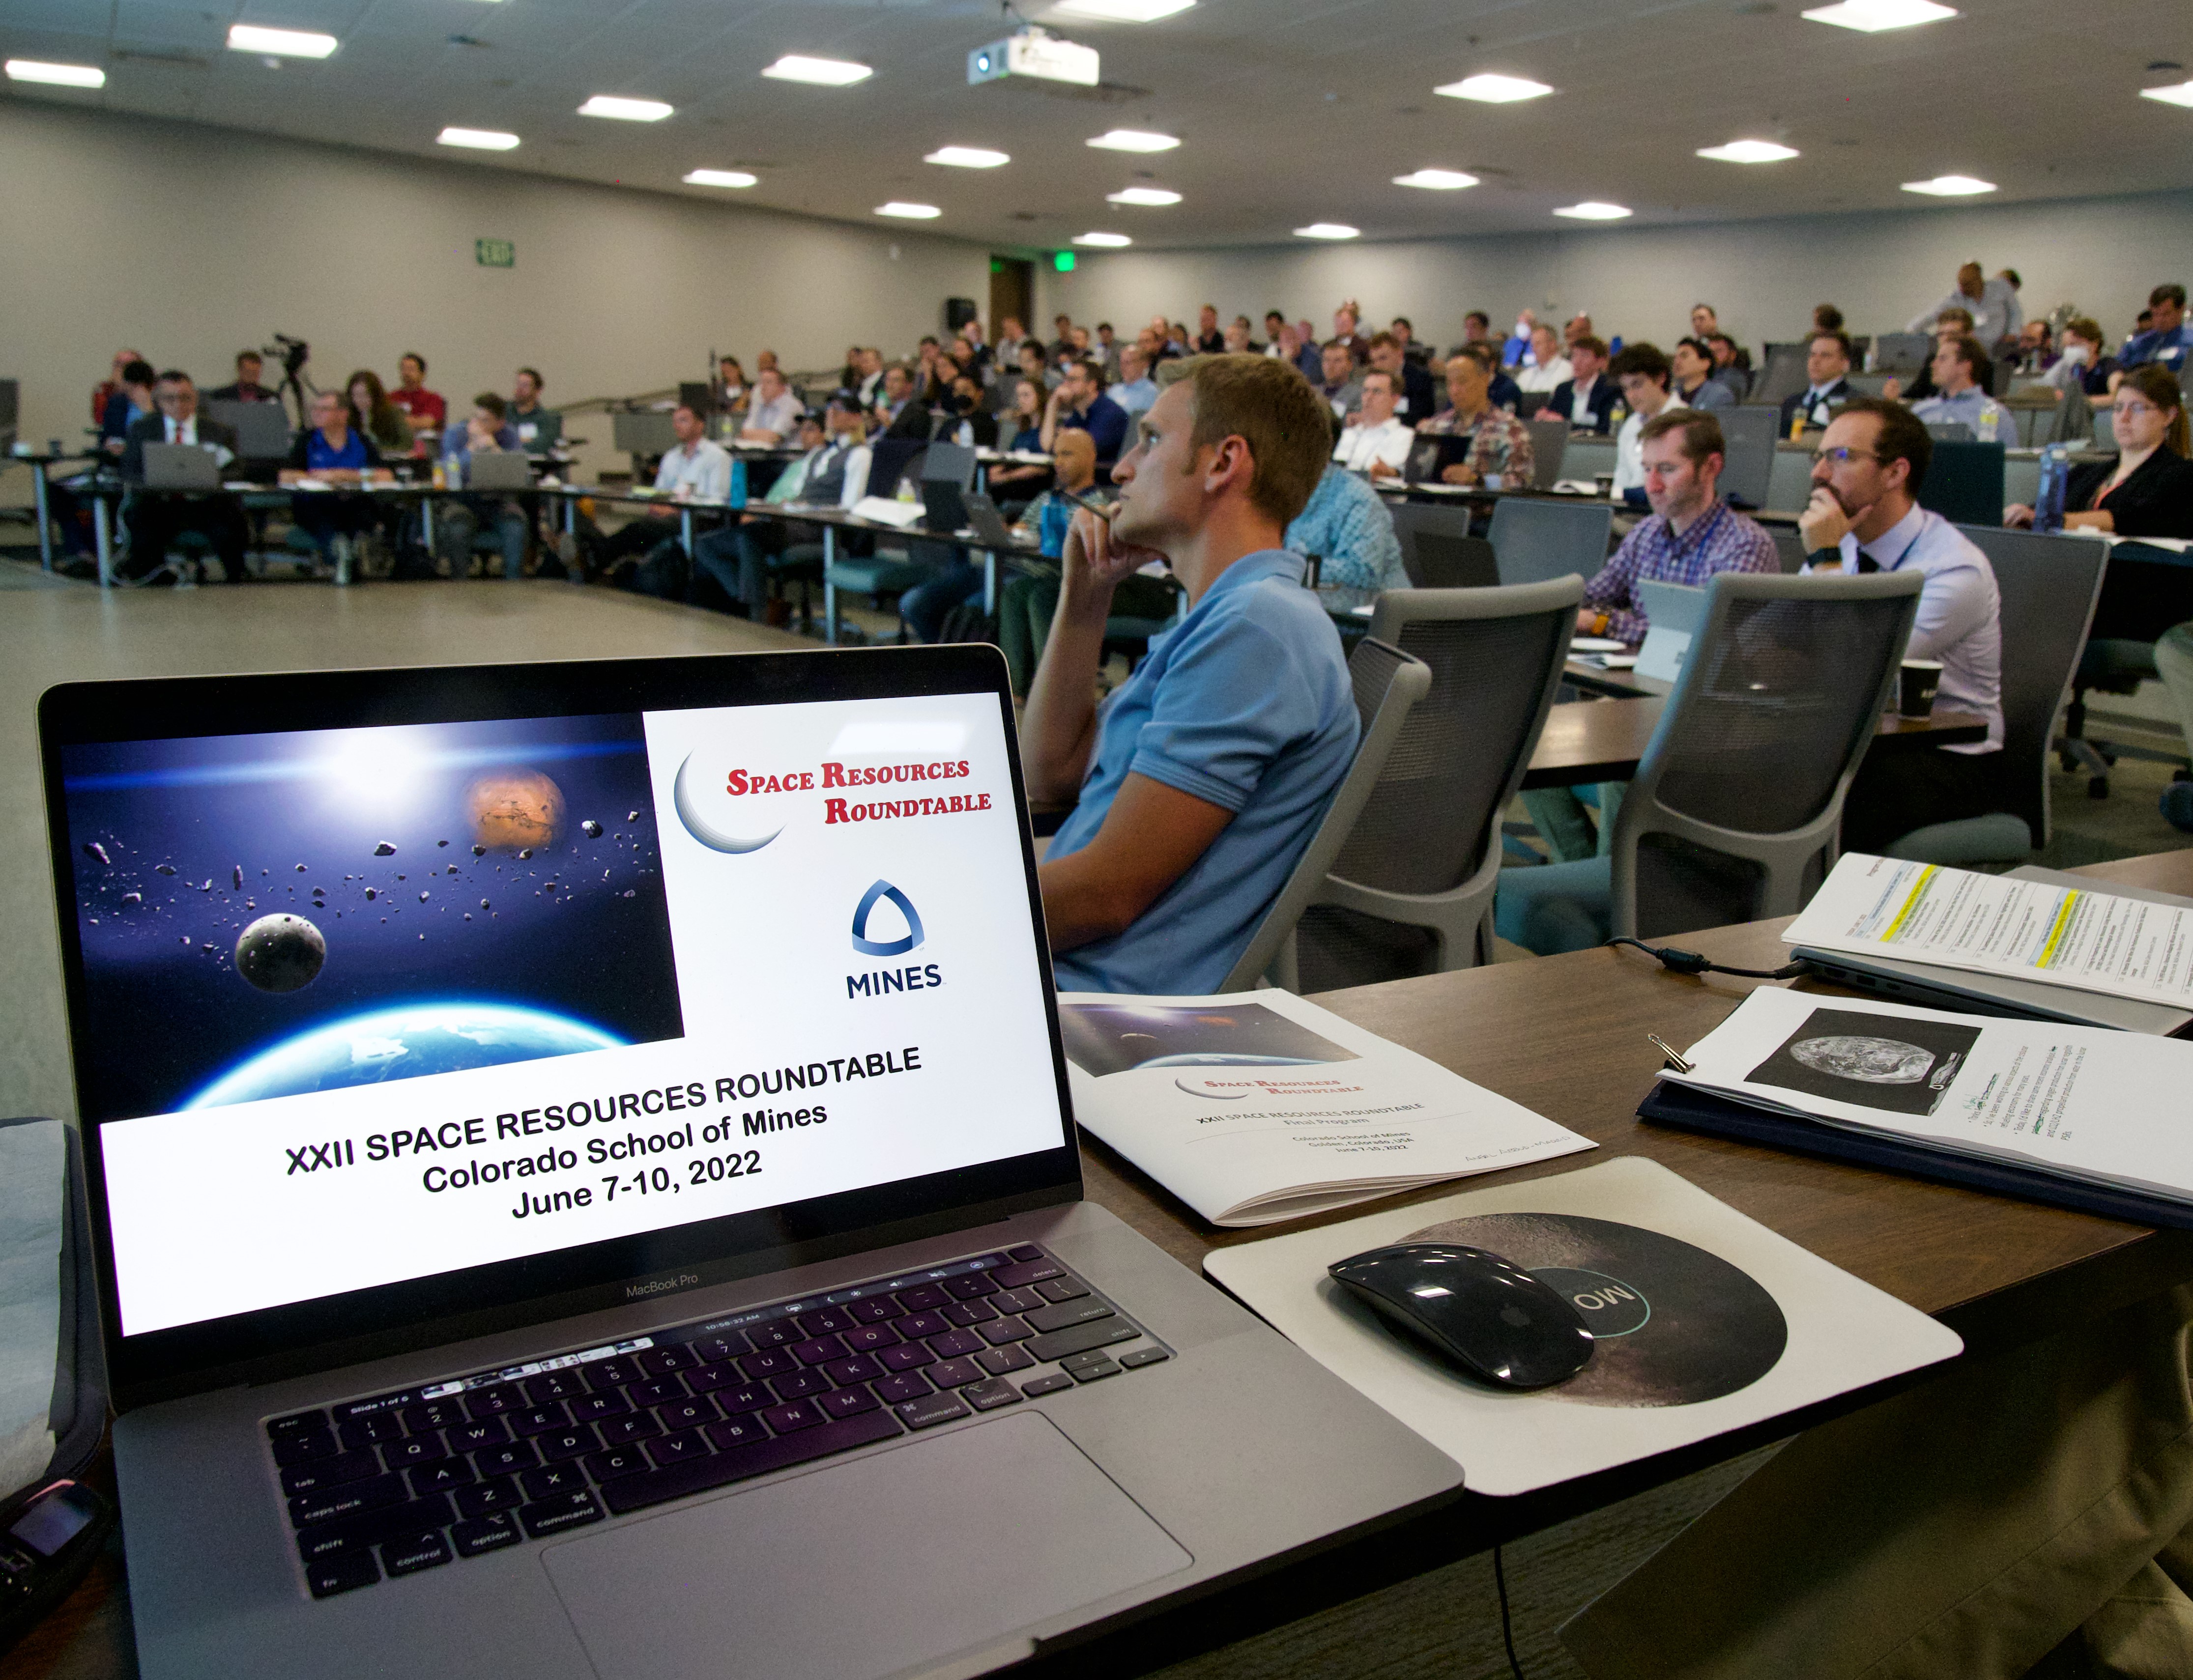 Experts gather at the Colorado School of Mines for a Space Resources Roundtable bringing together scientists, engineers, entrepreneurs, mining and mineral professionals, legal experts and policy makers.